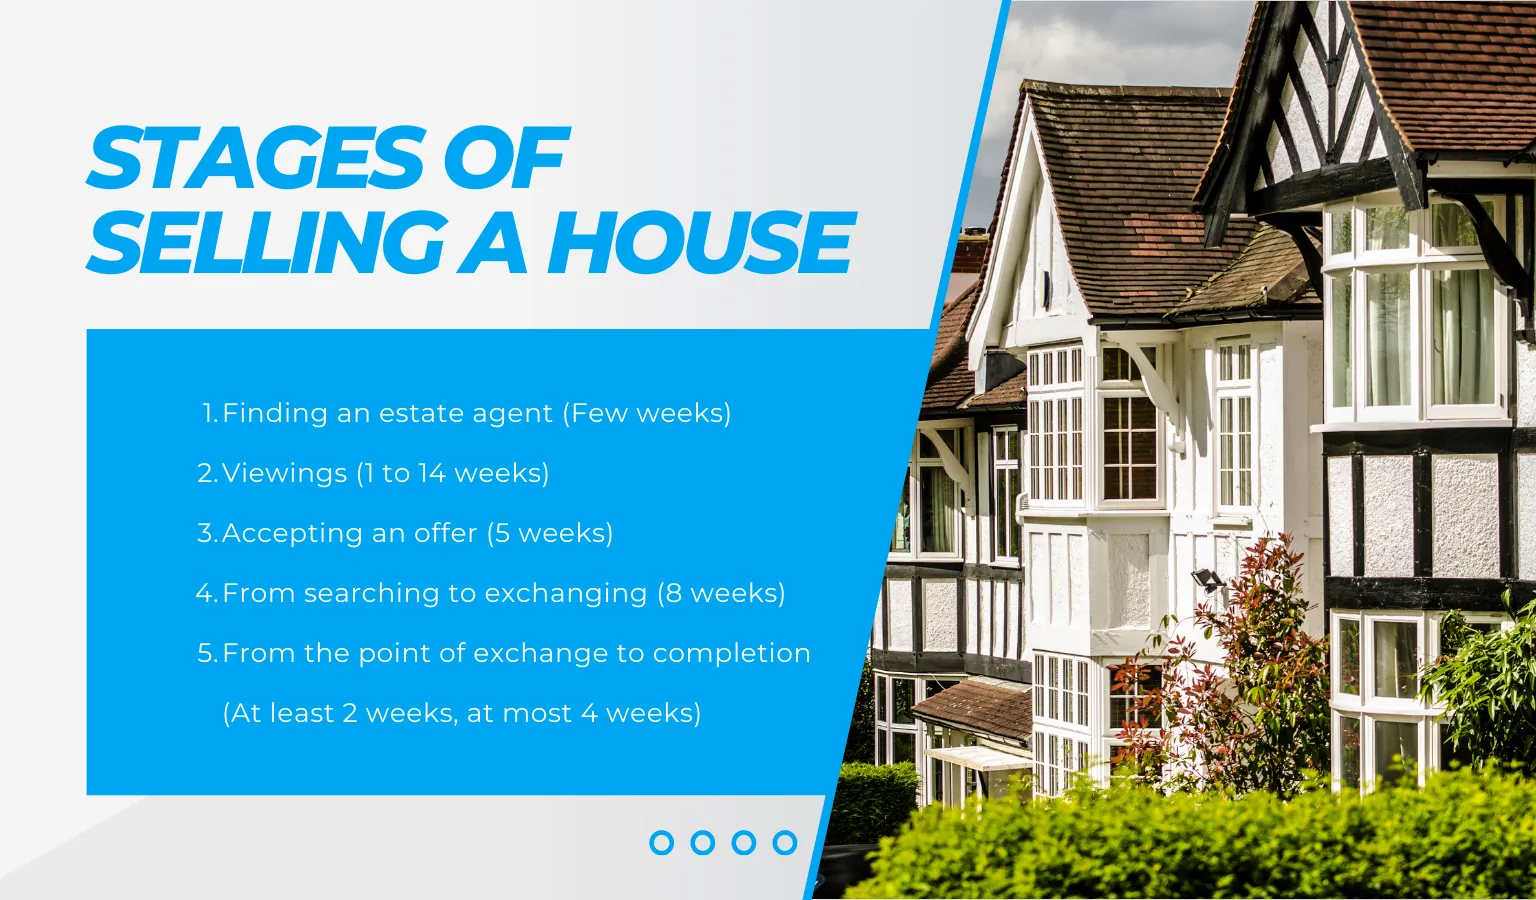 Stages of selling a house